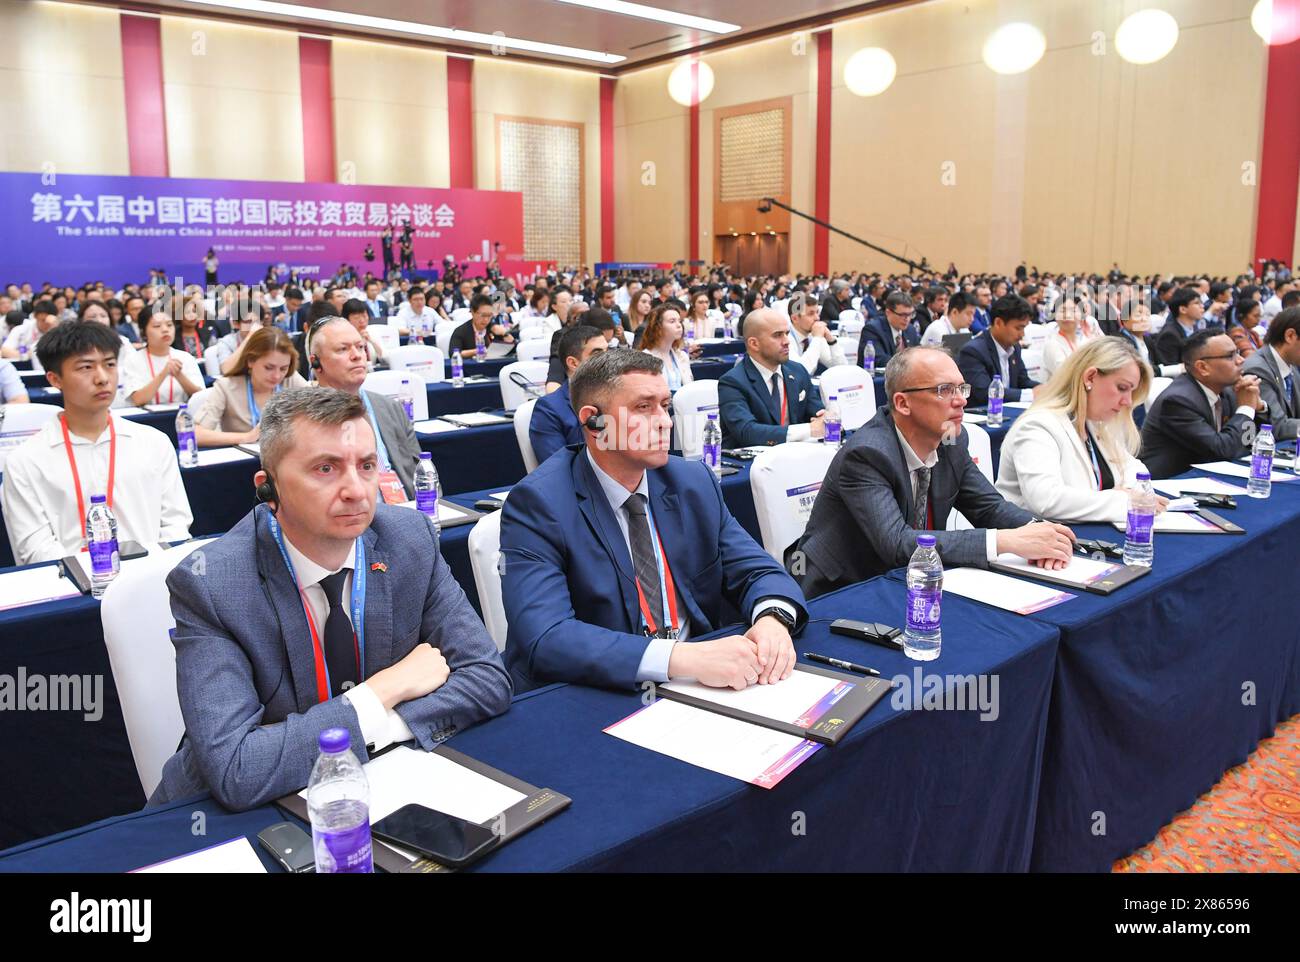 Chongqing. 23rd May, 2024. People attend the opening ceremony of the Sixth Western China International Fair for Investment and Trade in southwest China's Chongqing Municipality, May 23, 2024. With the theme of 'New Western China, New Manufacturing, New Services', the fair is held from May 23 to 26 in Chongqing. Credit: Wang Quanchao/Xinhua/Alamy Live News Stock Photo